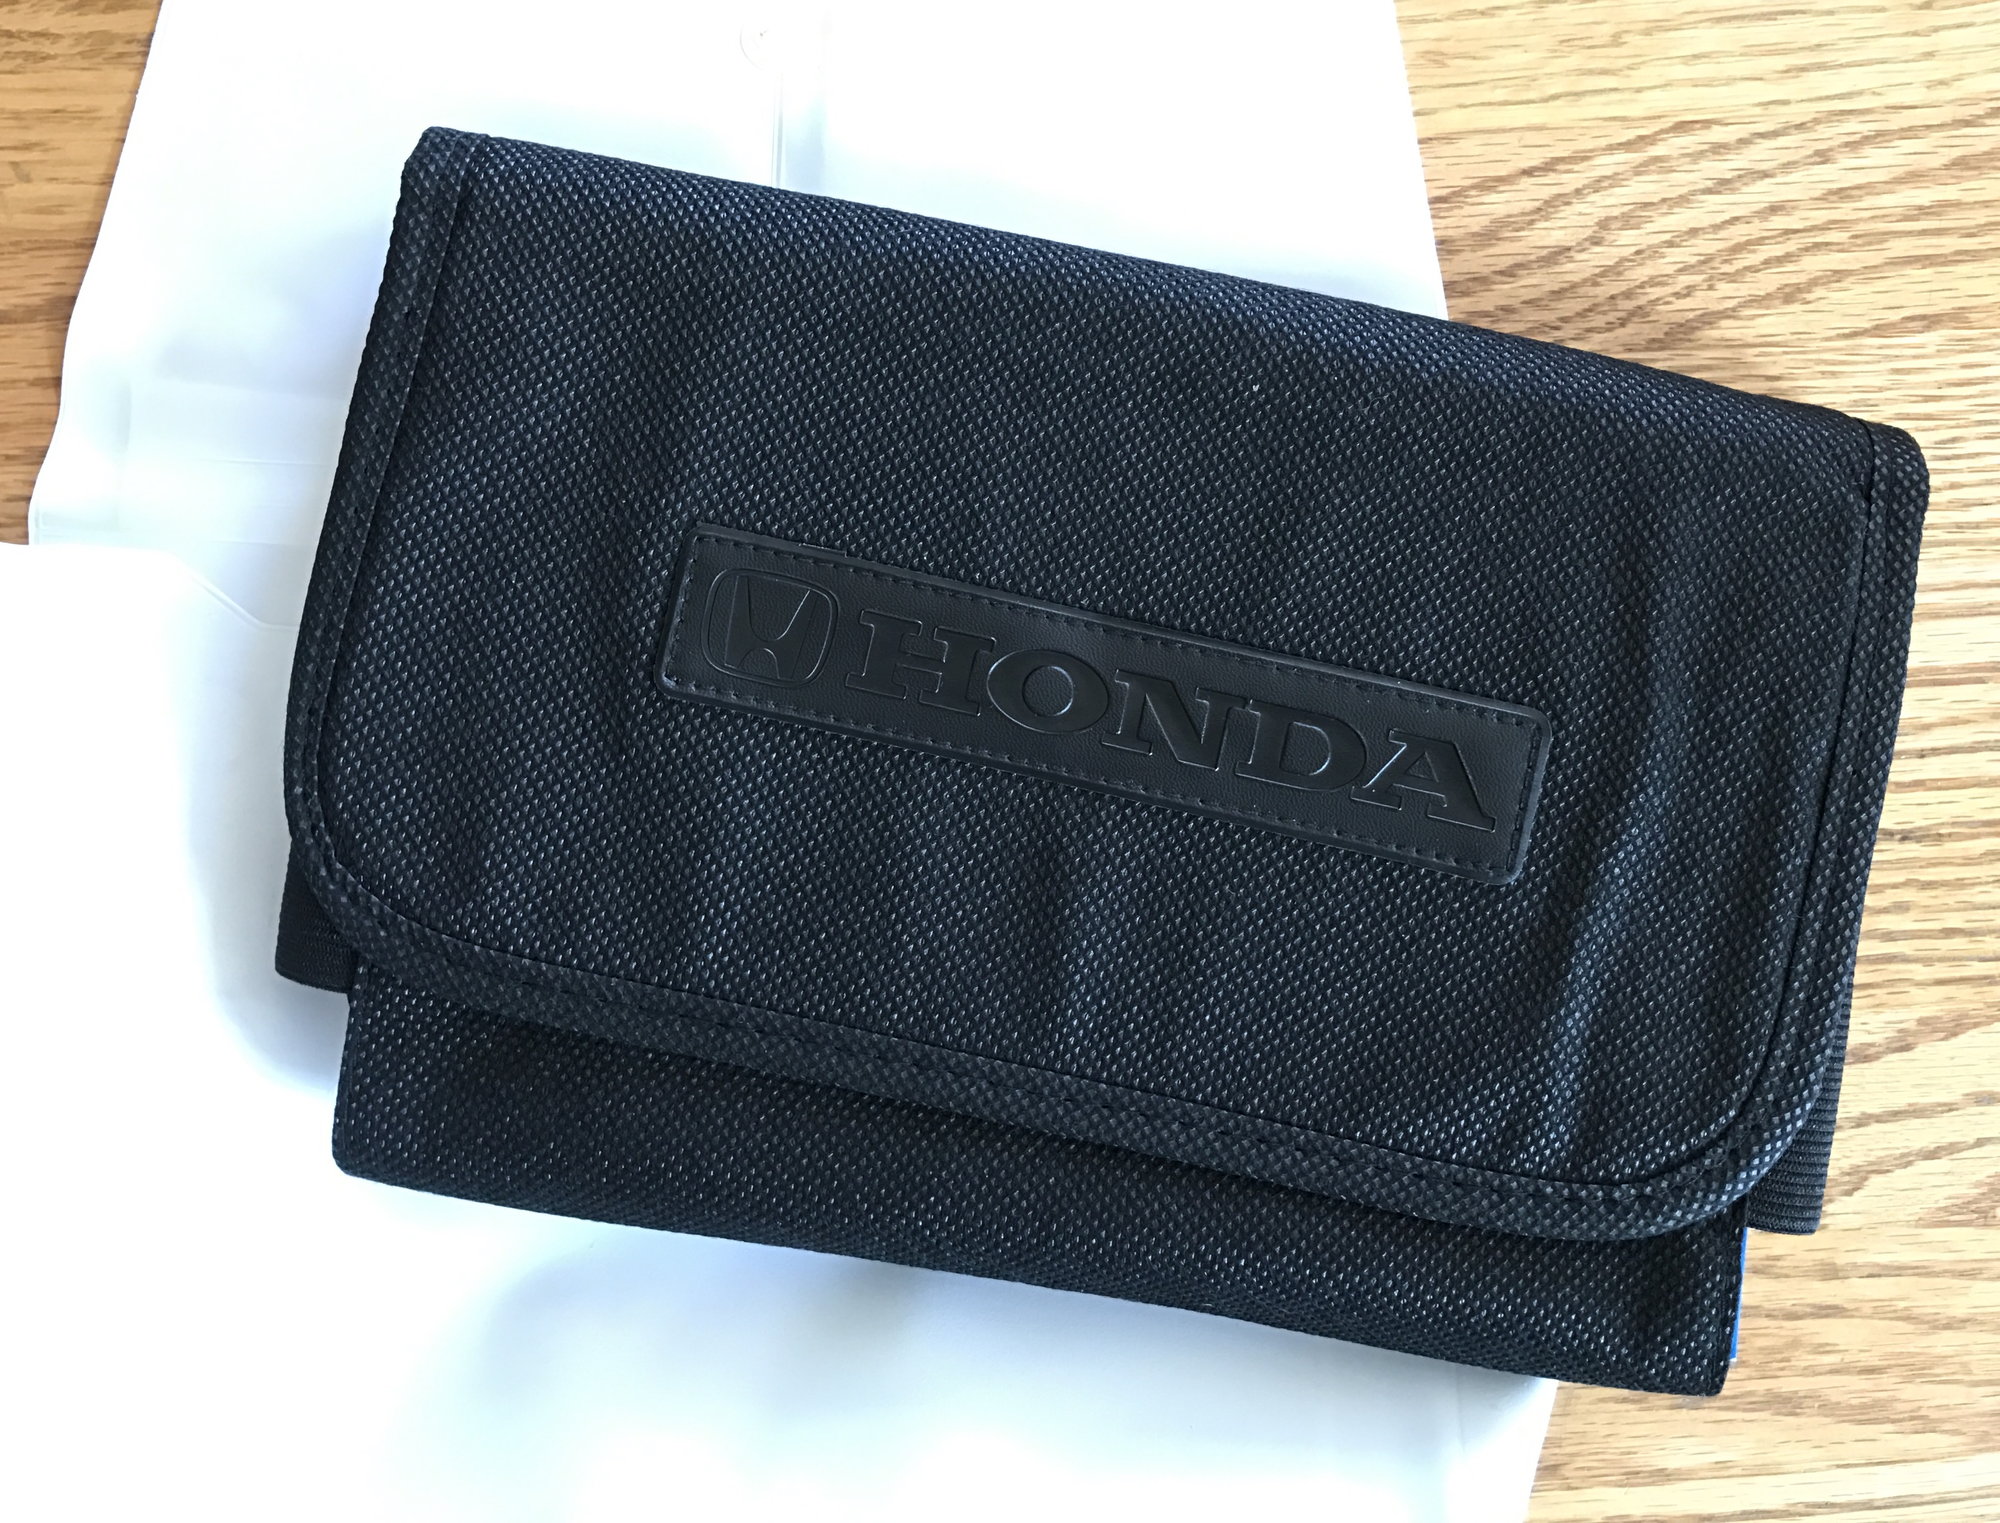 Found One!!! Honda Leather Document Holder!! - Unofficial Honda FIT Forums